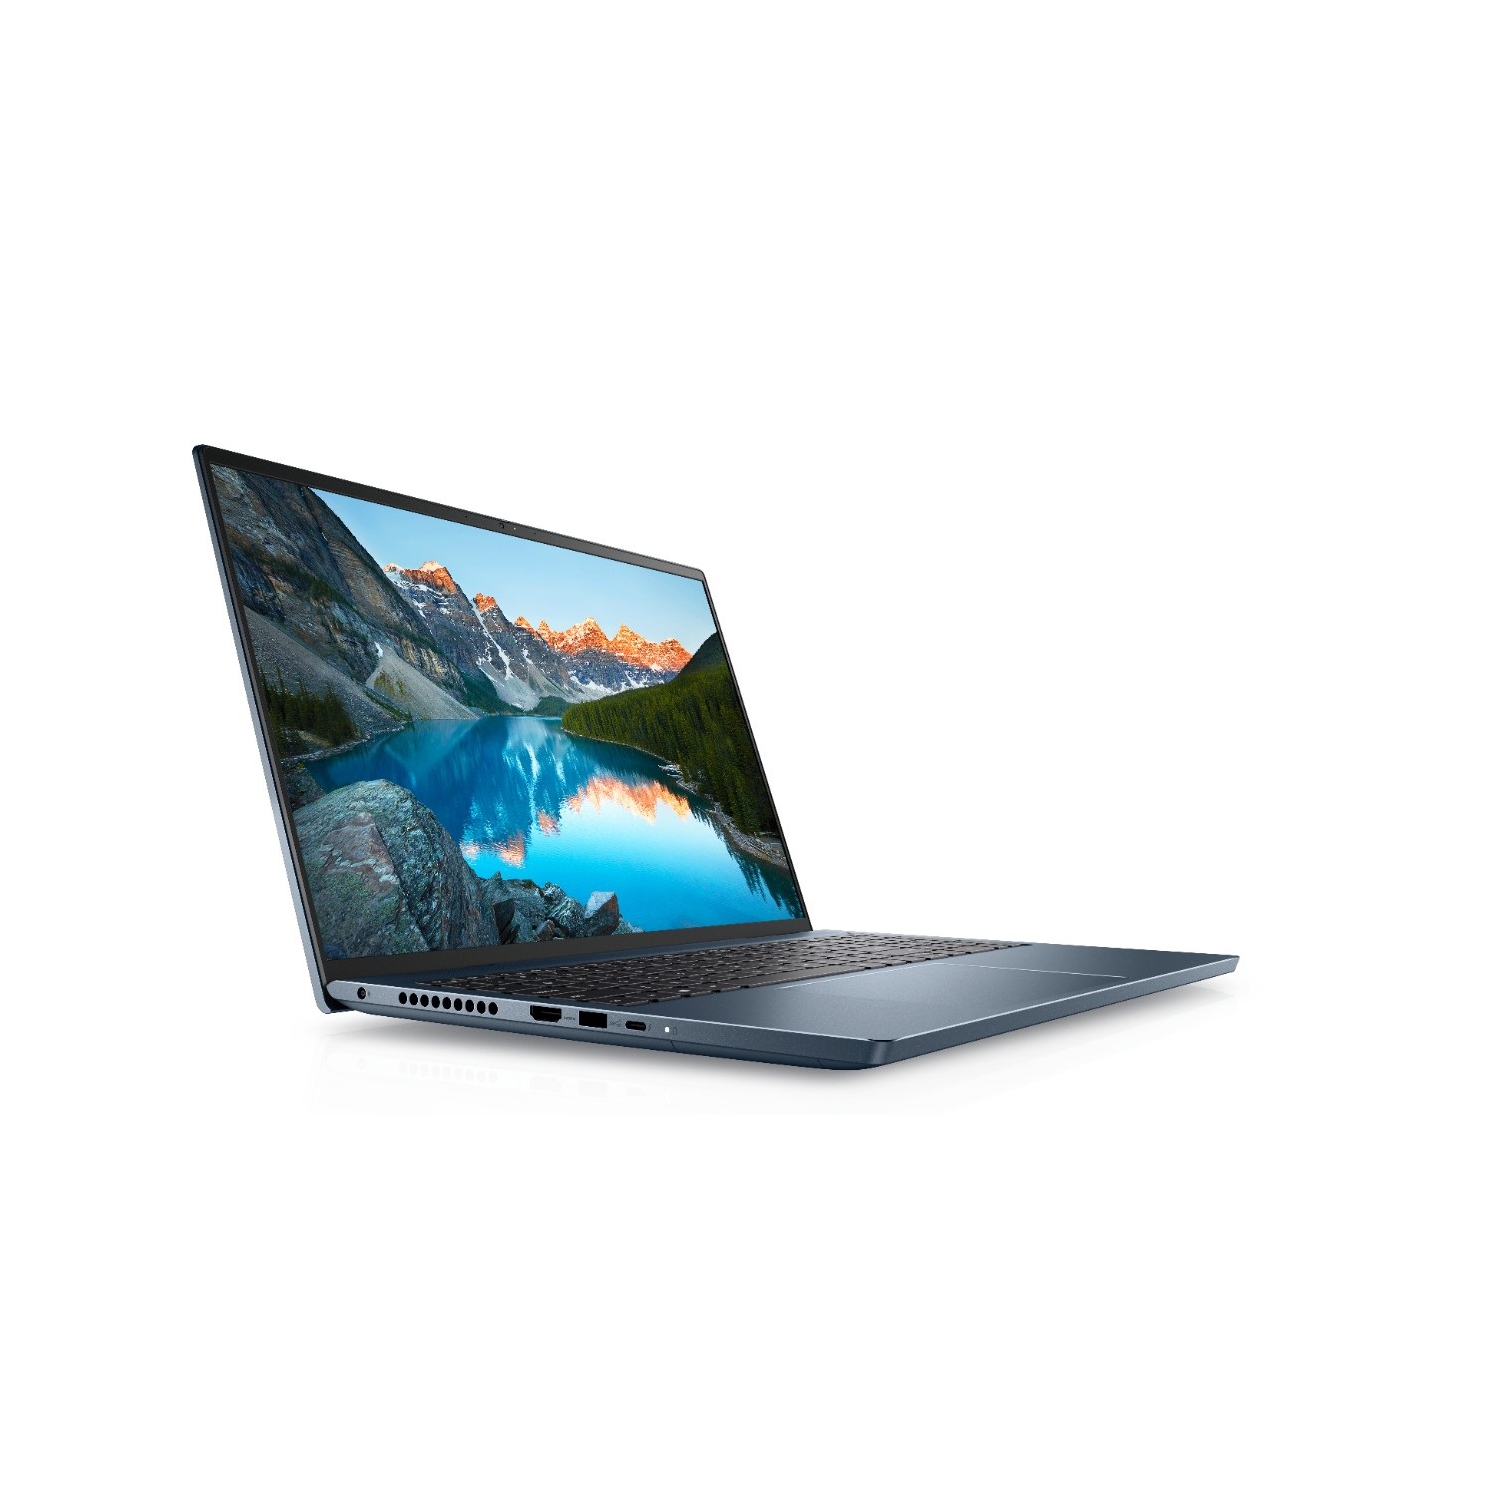 Open Box - Dell XPS 13 9310 13.4 FHD Touch/ i7-1185G7/ 16GB/ 1TB SSD/ FPR XPS9310-7351SLV-PUS/ IRIS XE Graphics/ Win 10